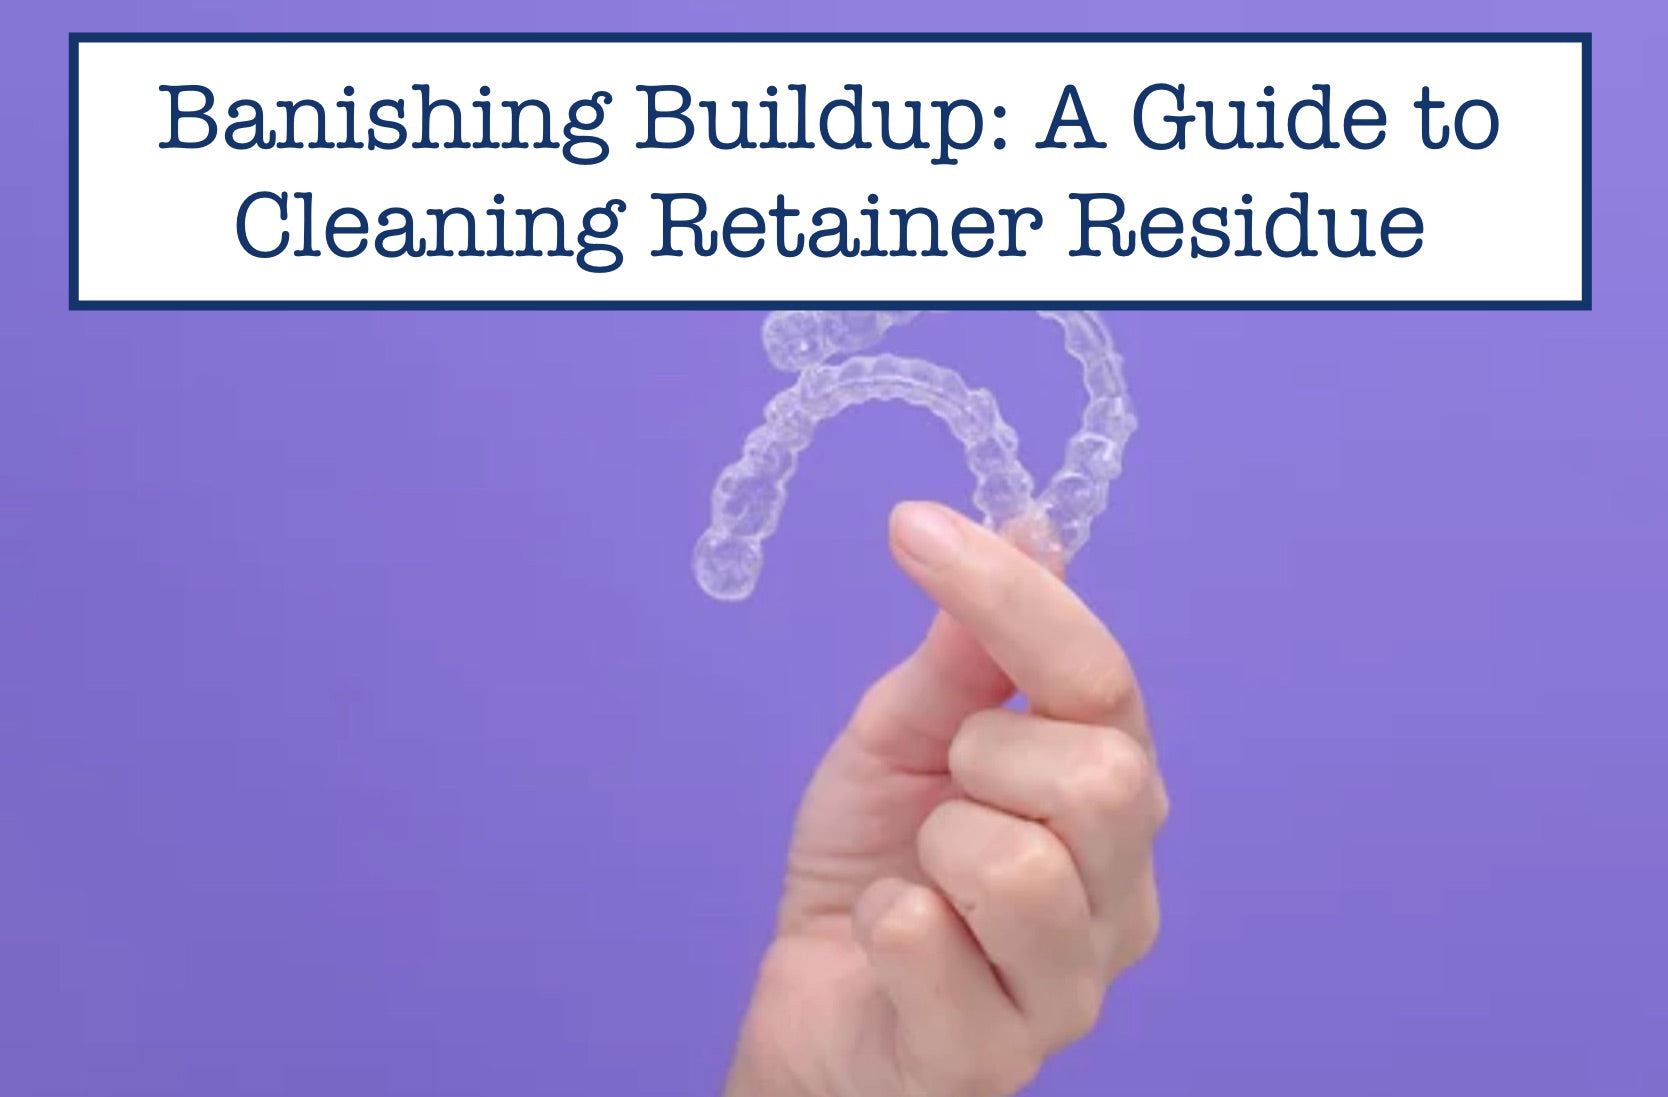 Banishing Buildup: A Guide to Cleaning Retainer Residue